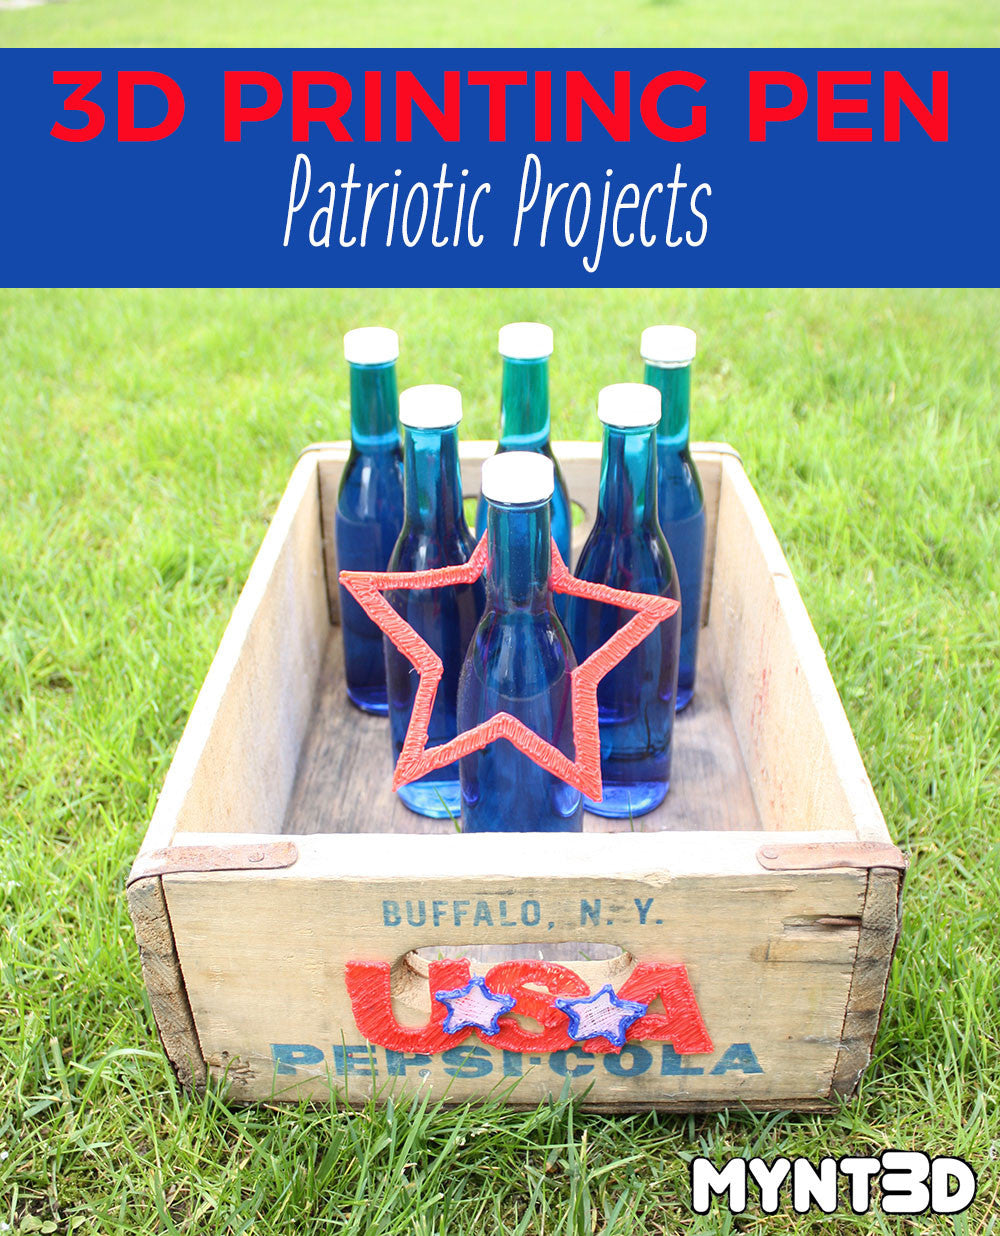 Patriotic Projects Made with a 3D Printing Pen